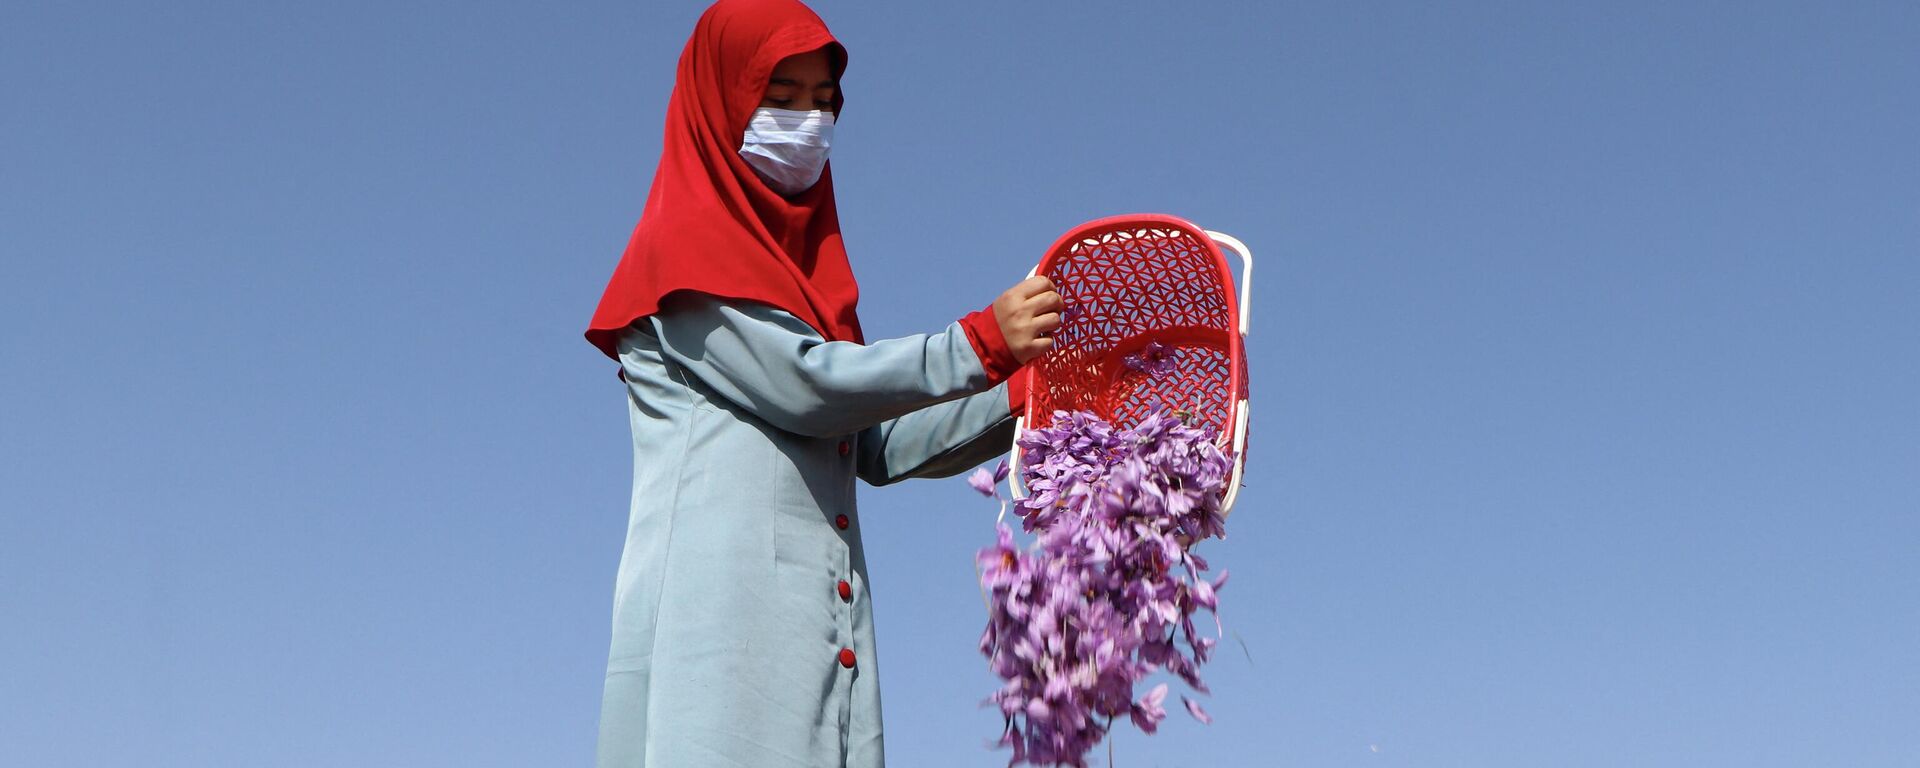 An Afghan woman harvests saffron flowers in a field on the outskirts of Herat province on October 31, 2022. - Sputnik International, 1920, 01.11.2022